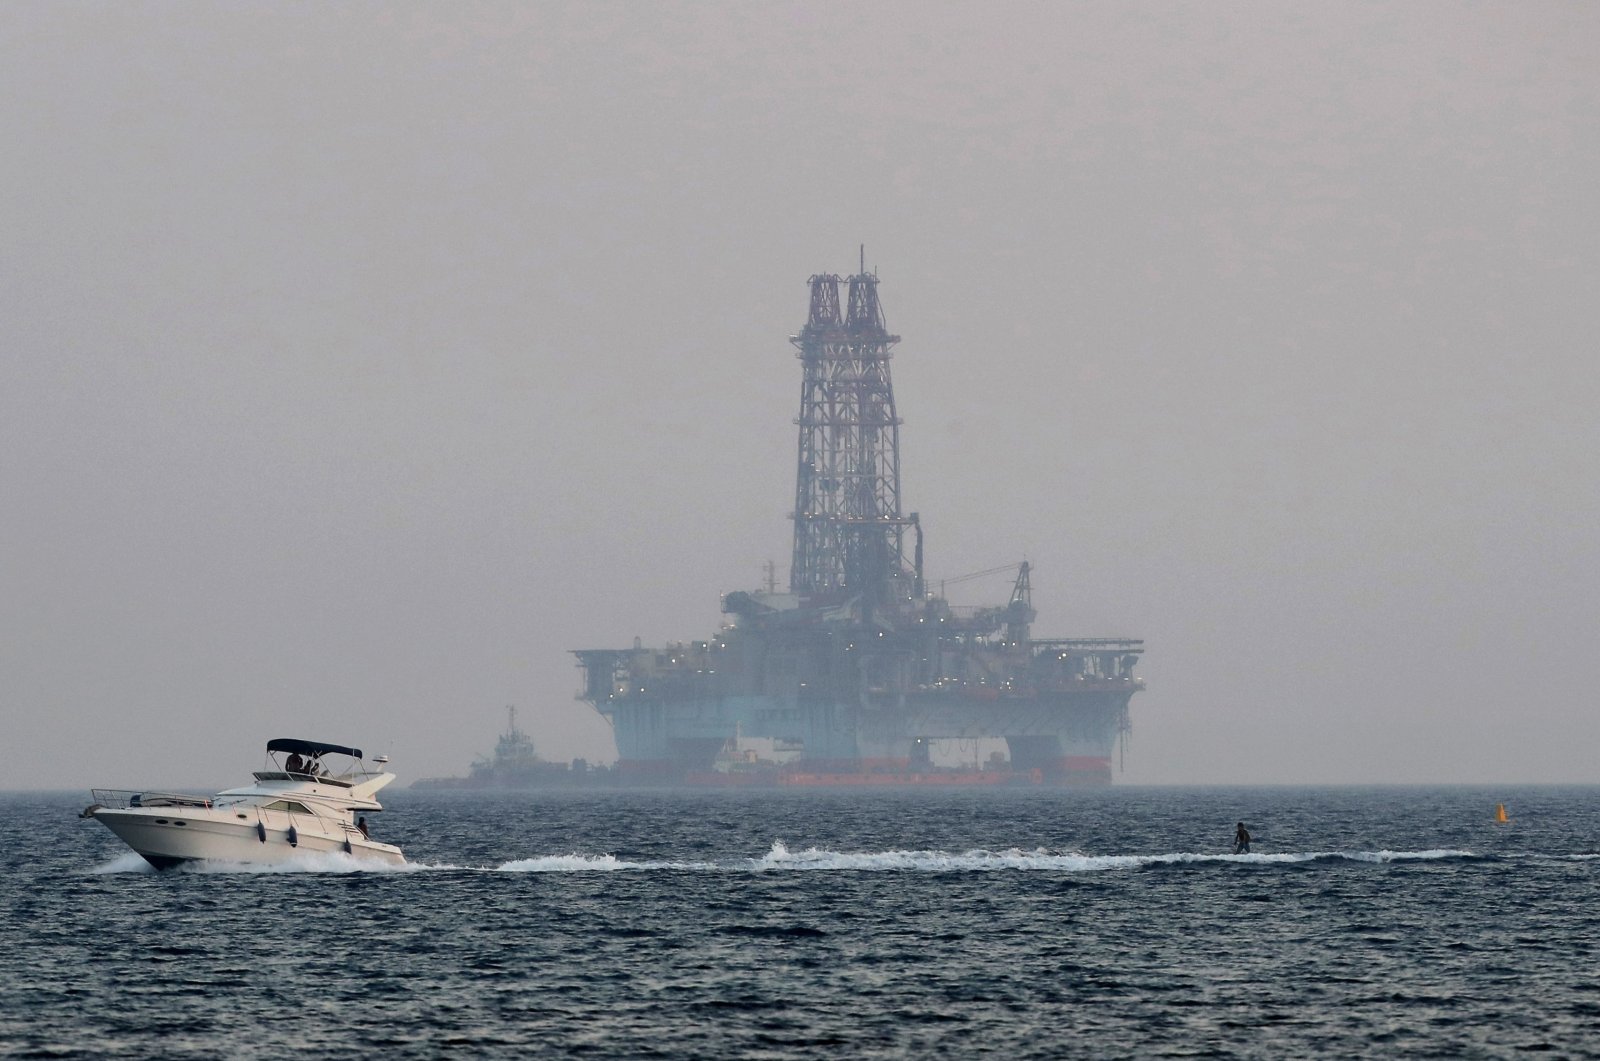 An offshore drilling rig is seen in the waters off Cyprus&#039; coastal city of Limassol as a boat passes with a skier, July 5, 2020. (AP File Photo)